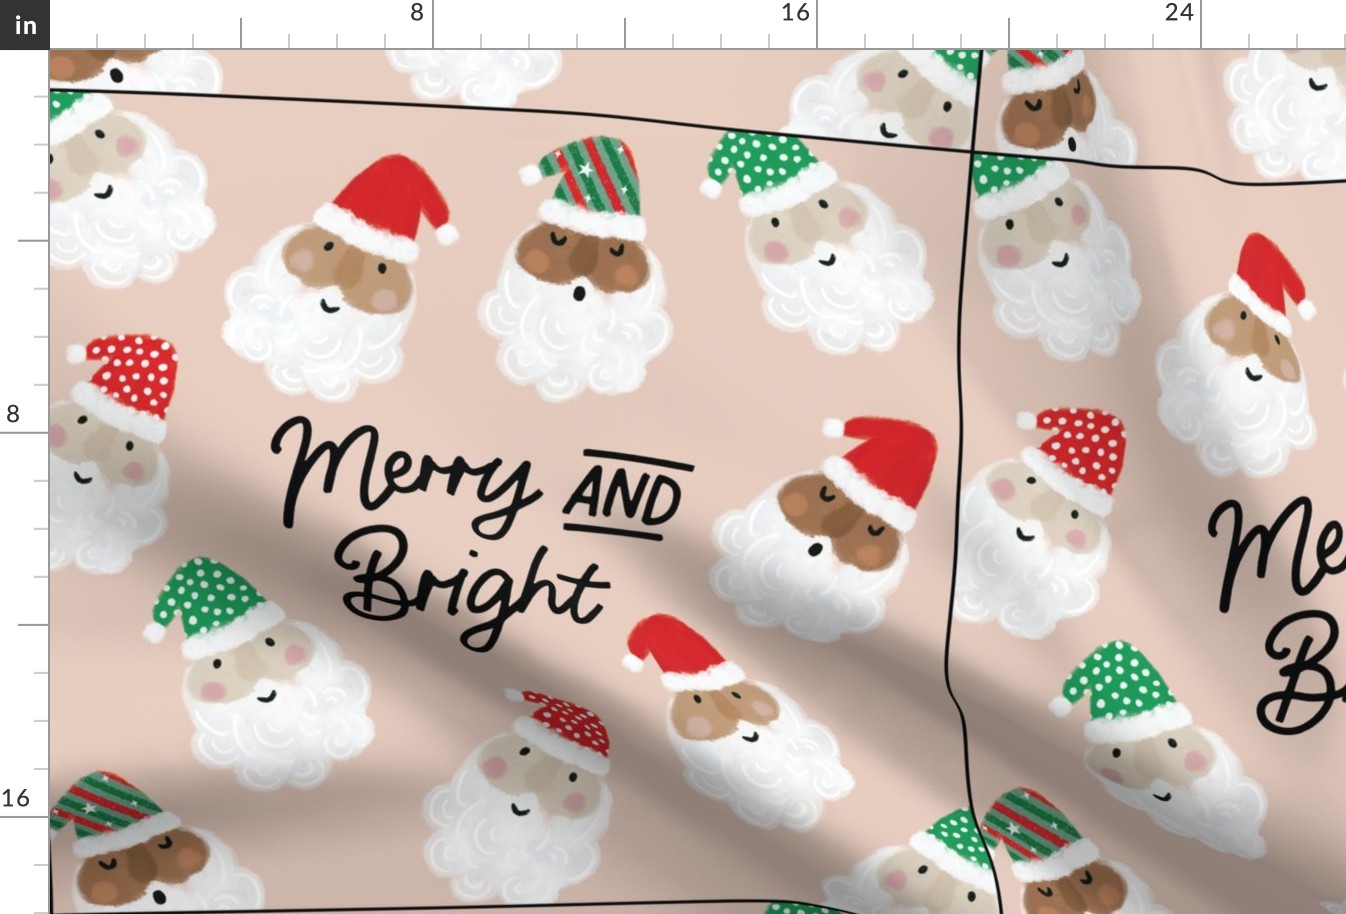 6 loveys: merry and bright on christmas blush